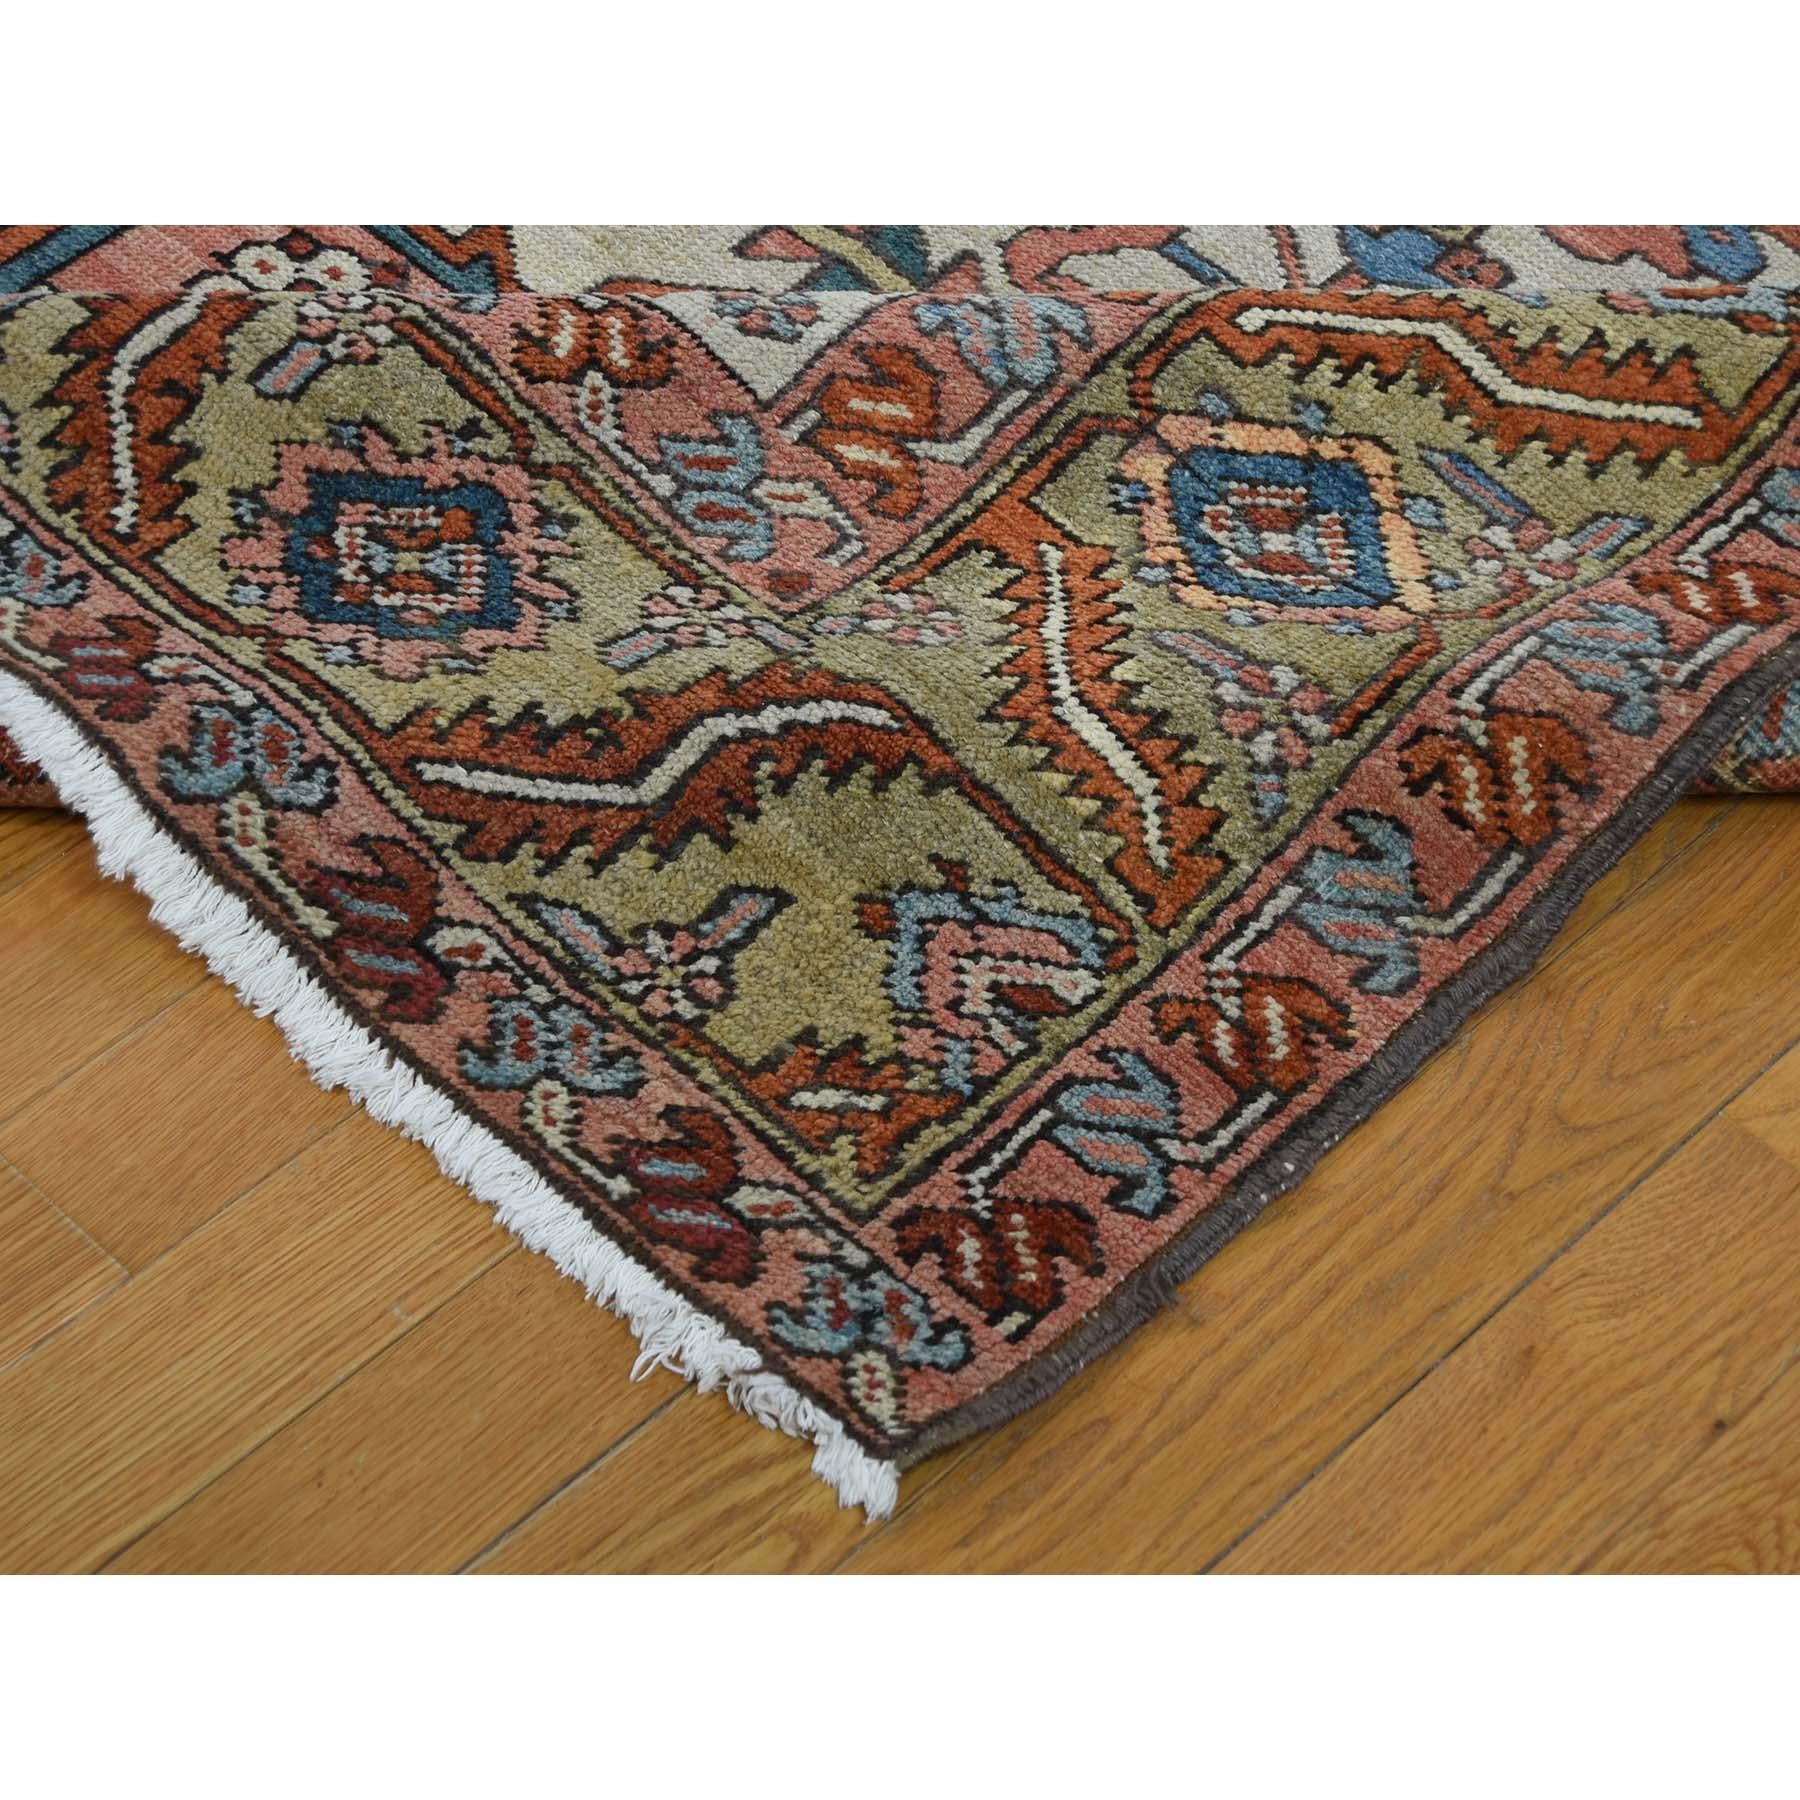 Wool Persian Serapi Heriz Excellent Condition Hand Knotted Oversize Oriental Rug